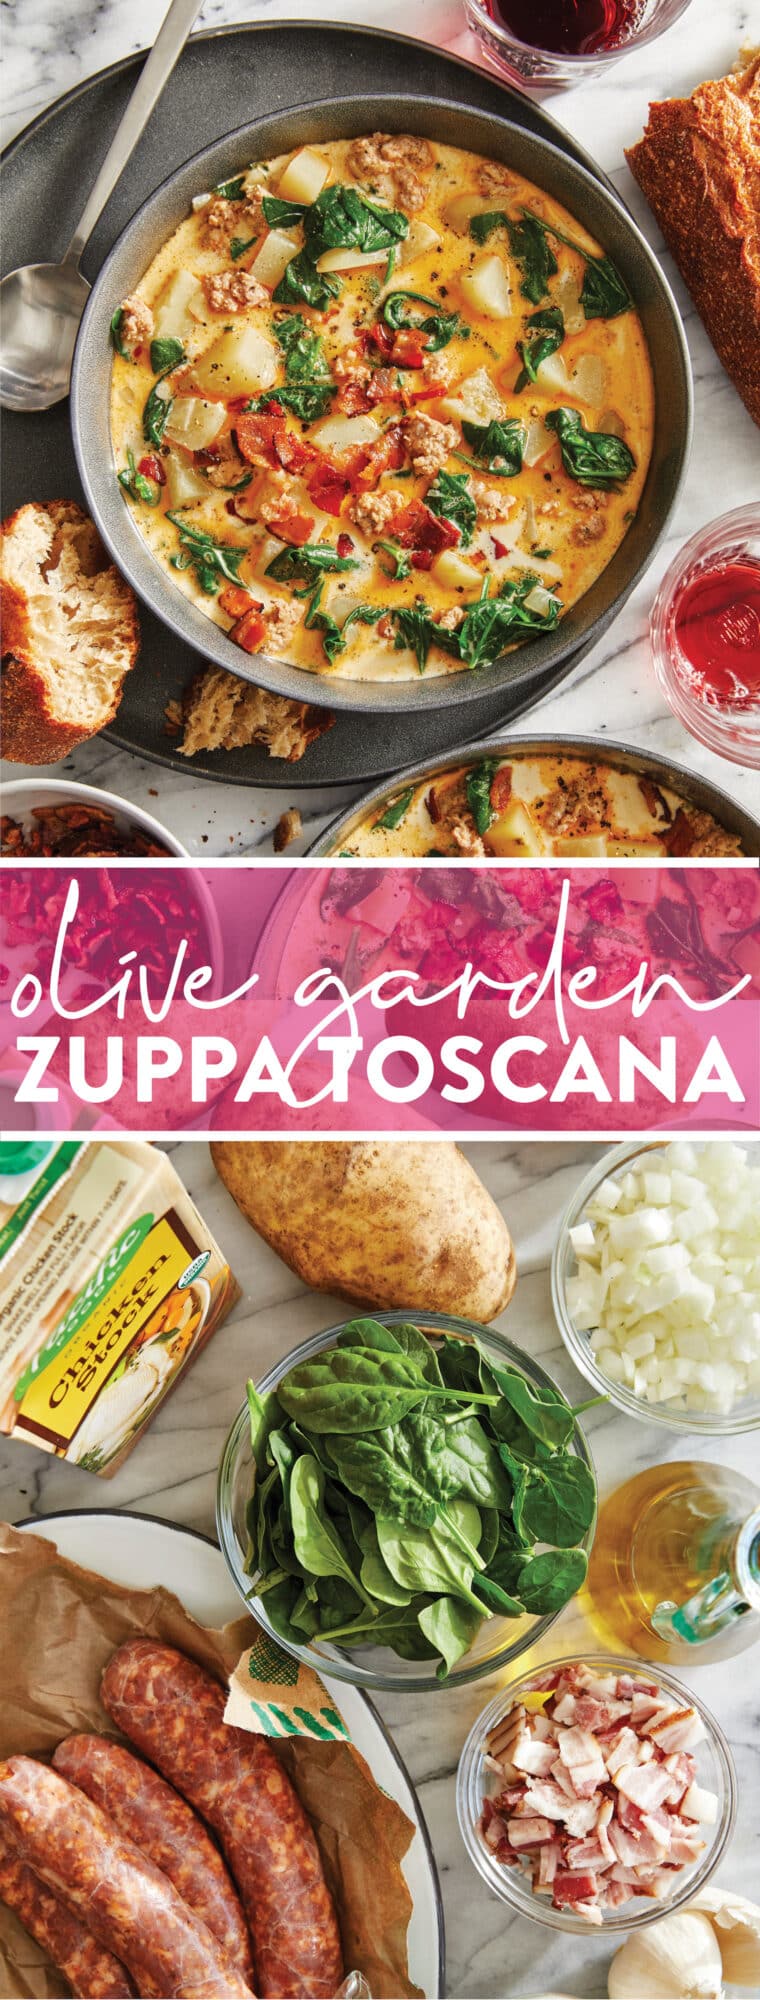 Olive Garden Zuppa Toscana Copycat Recipe - So easy to make and 10x better than the original! With Italian sausage, potatoes, spinach + bacon!